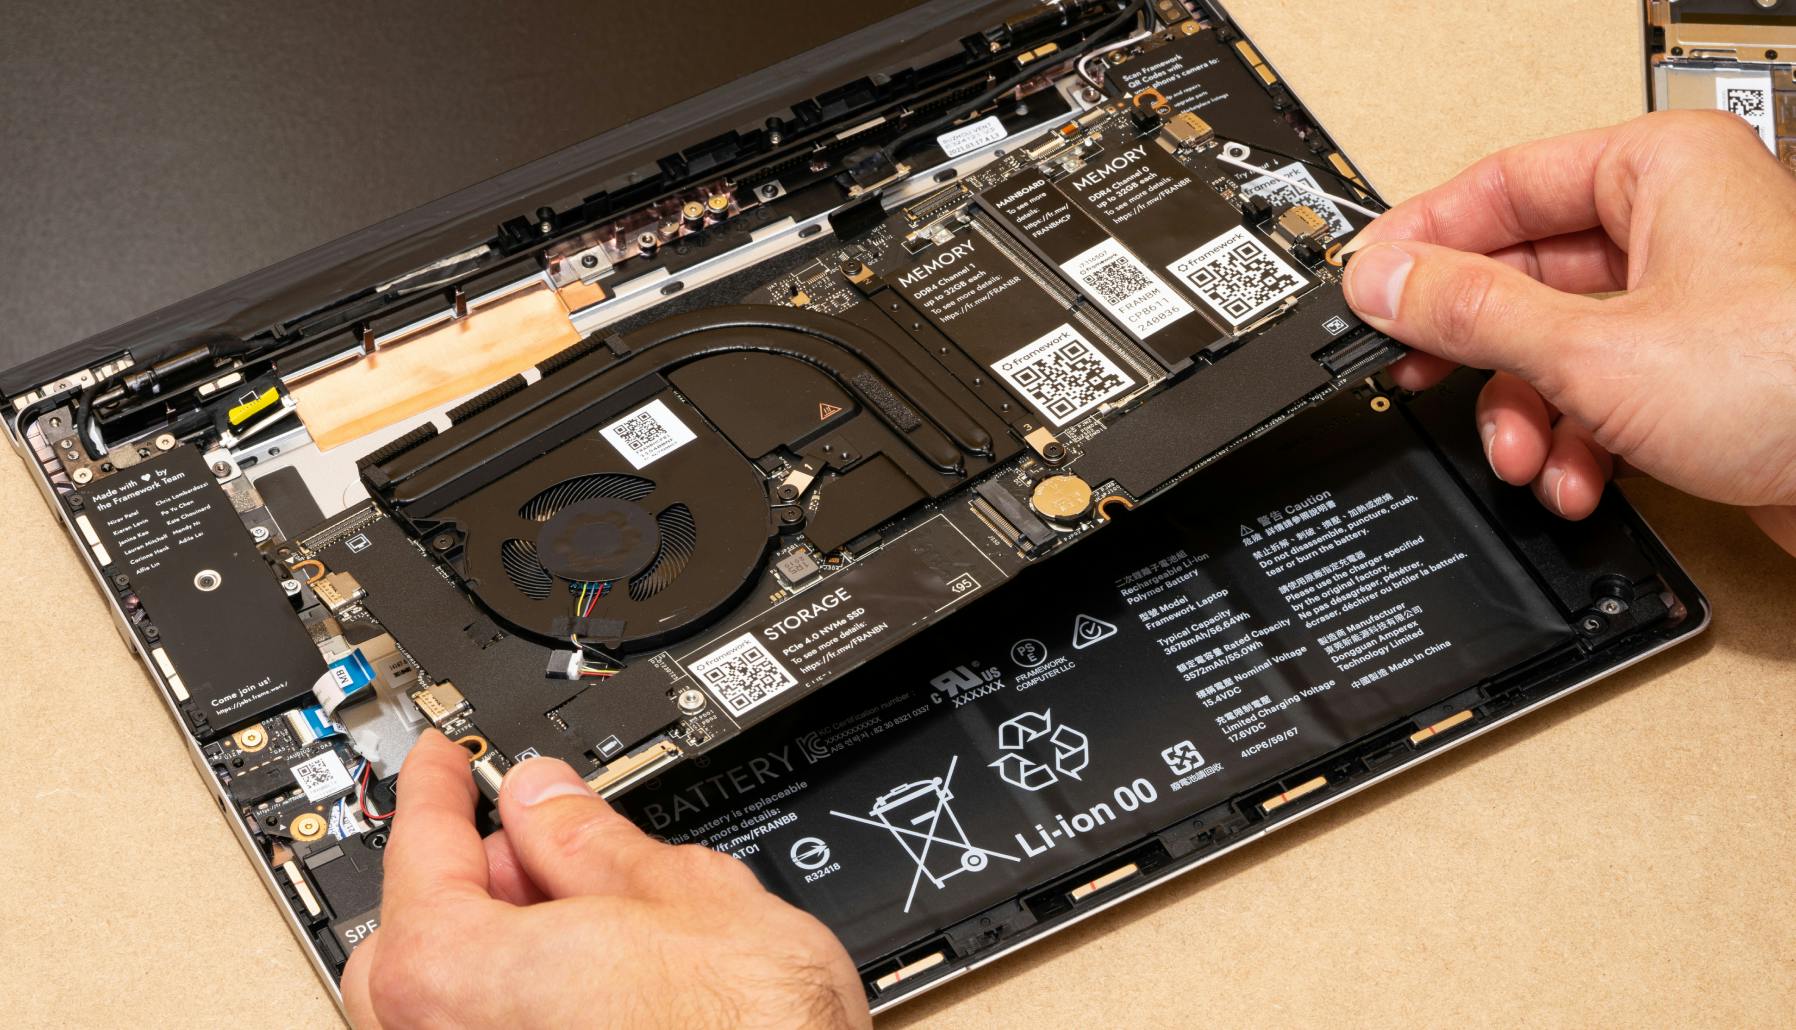 Someone removing the mainboard from the laptop.